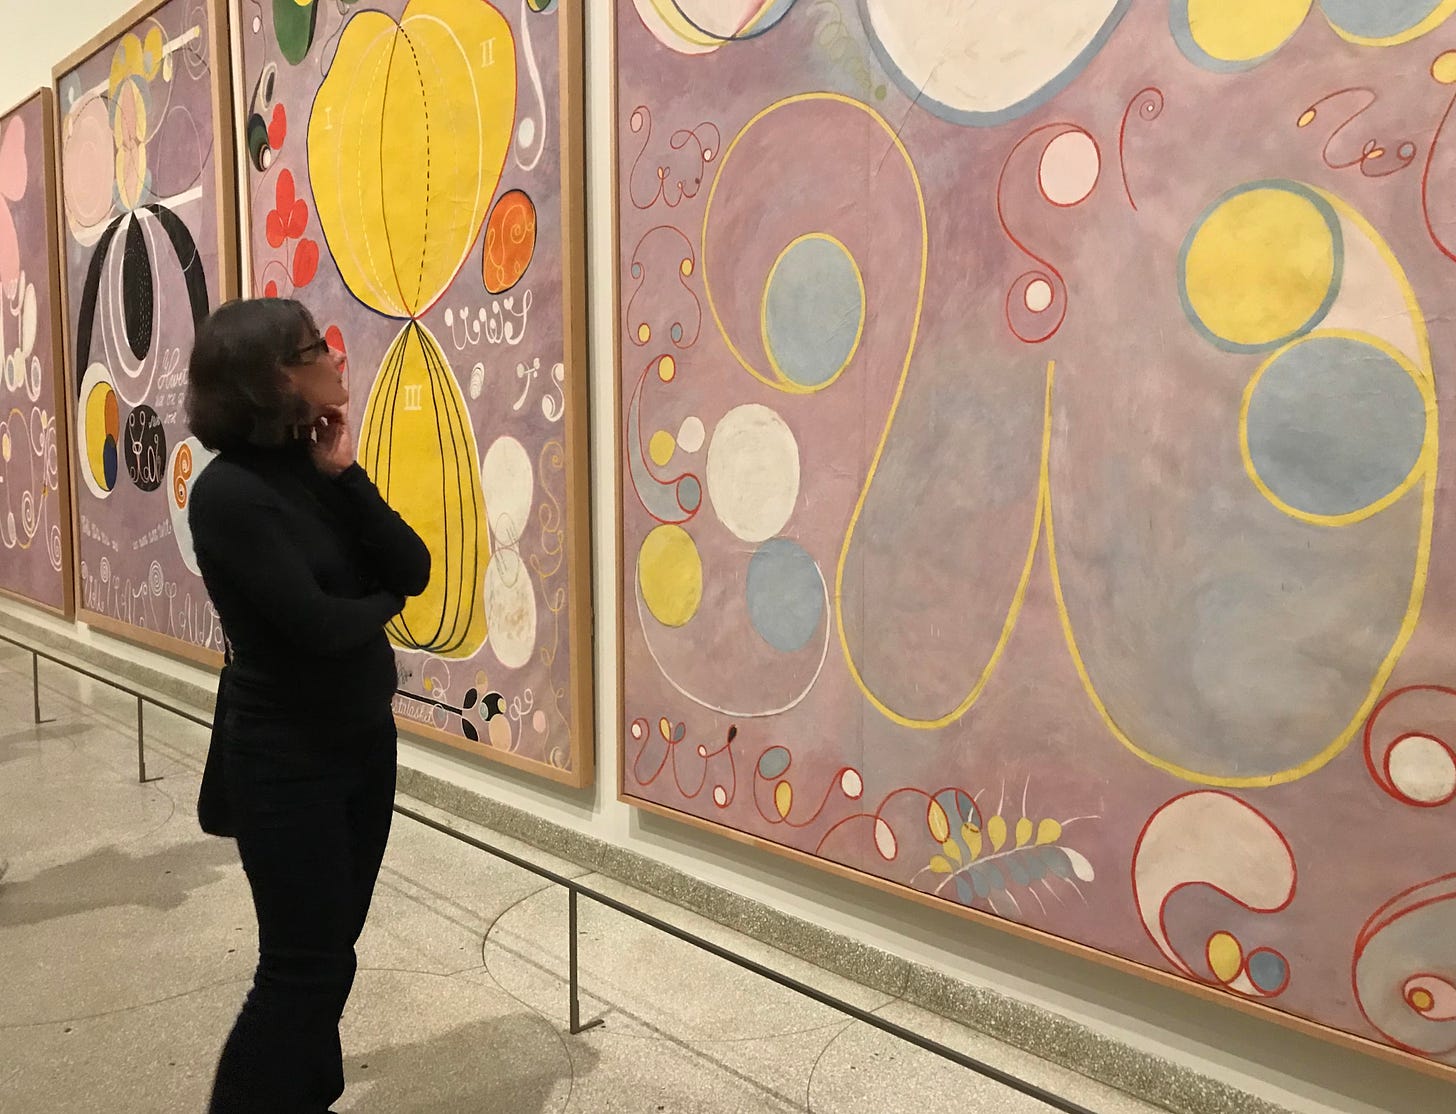 the author standing in a gallery and looking at one of the paintings known as the Ten Largest by Hilma af Klint